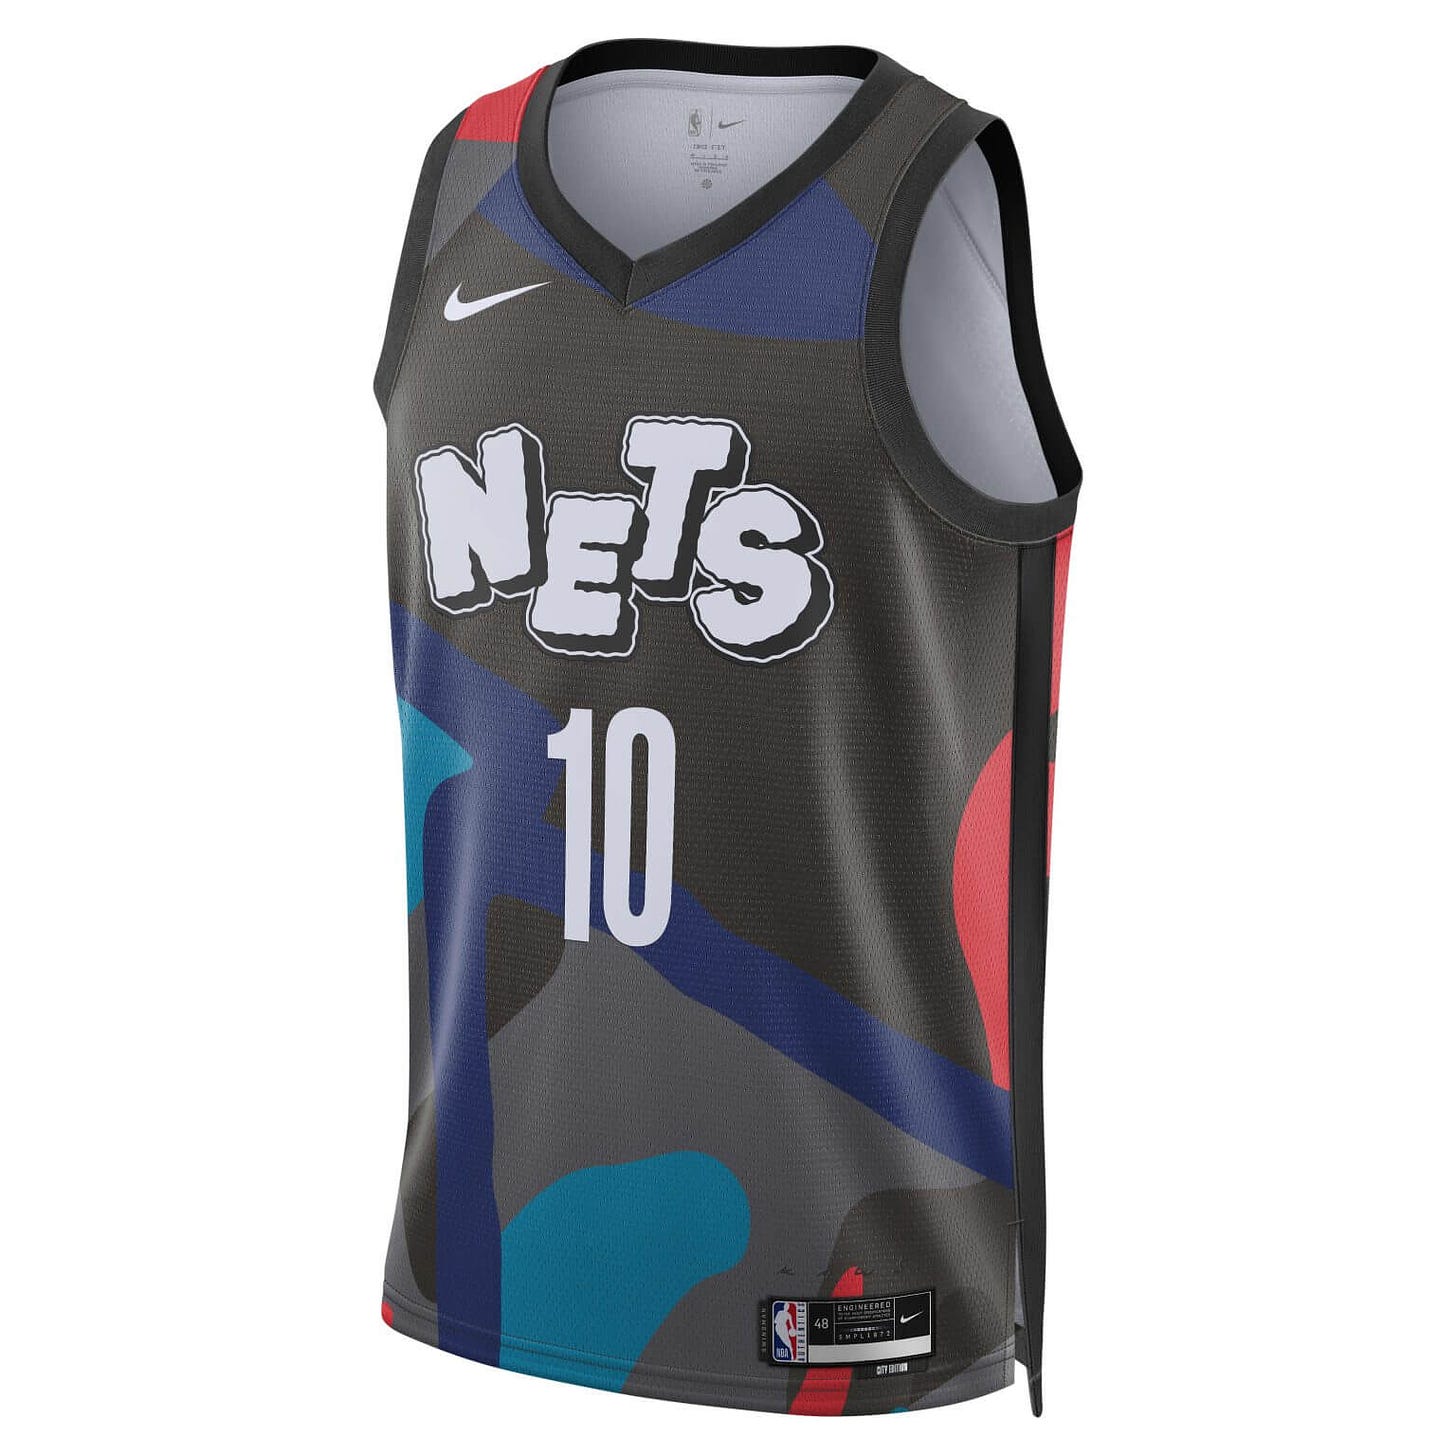 Must See: Knicks city edition jerseys possibly leaked